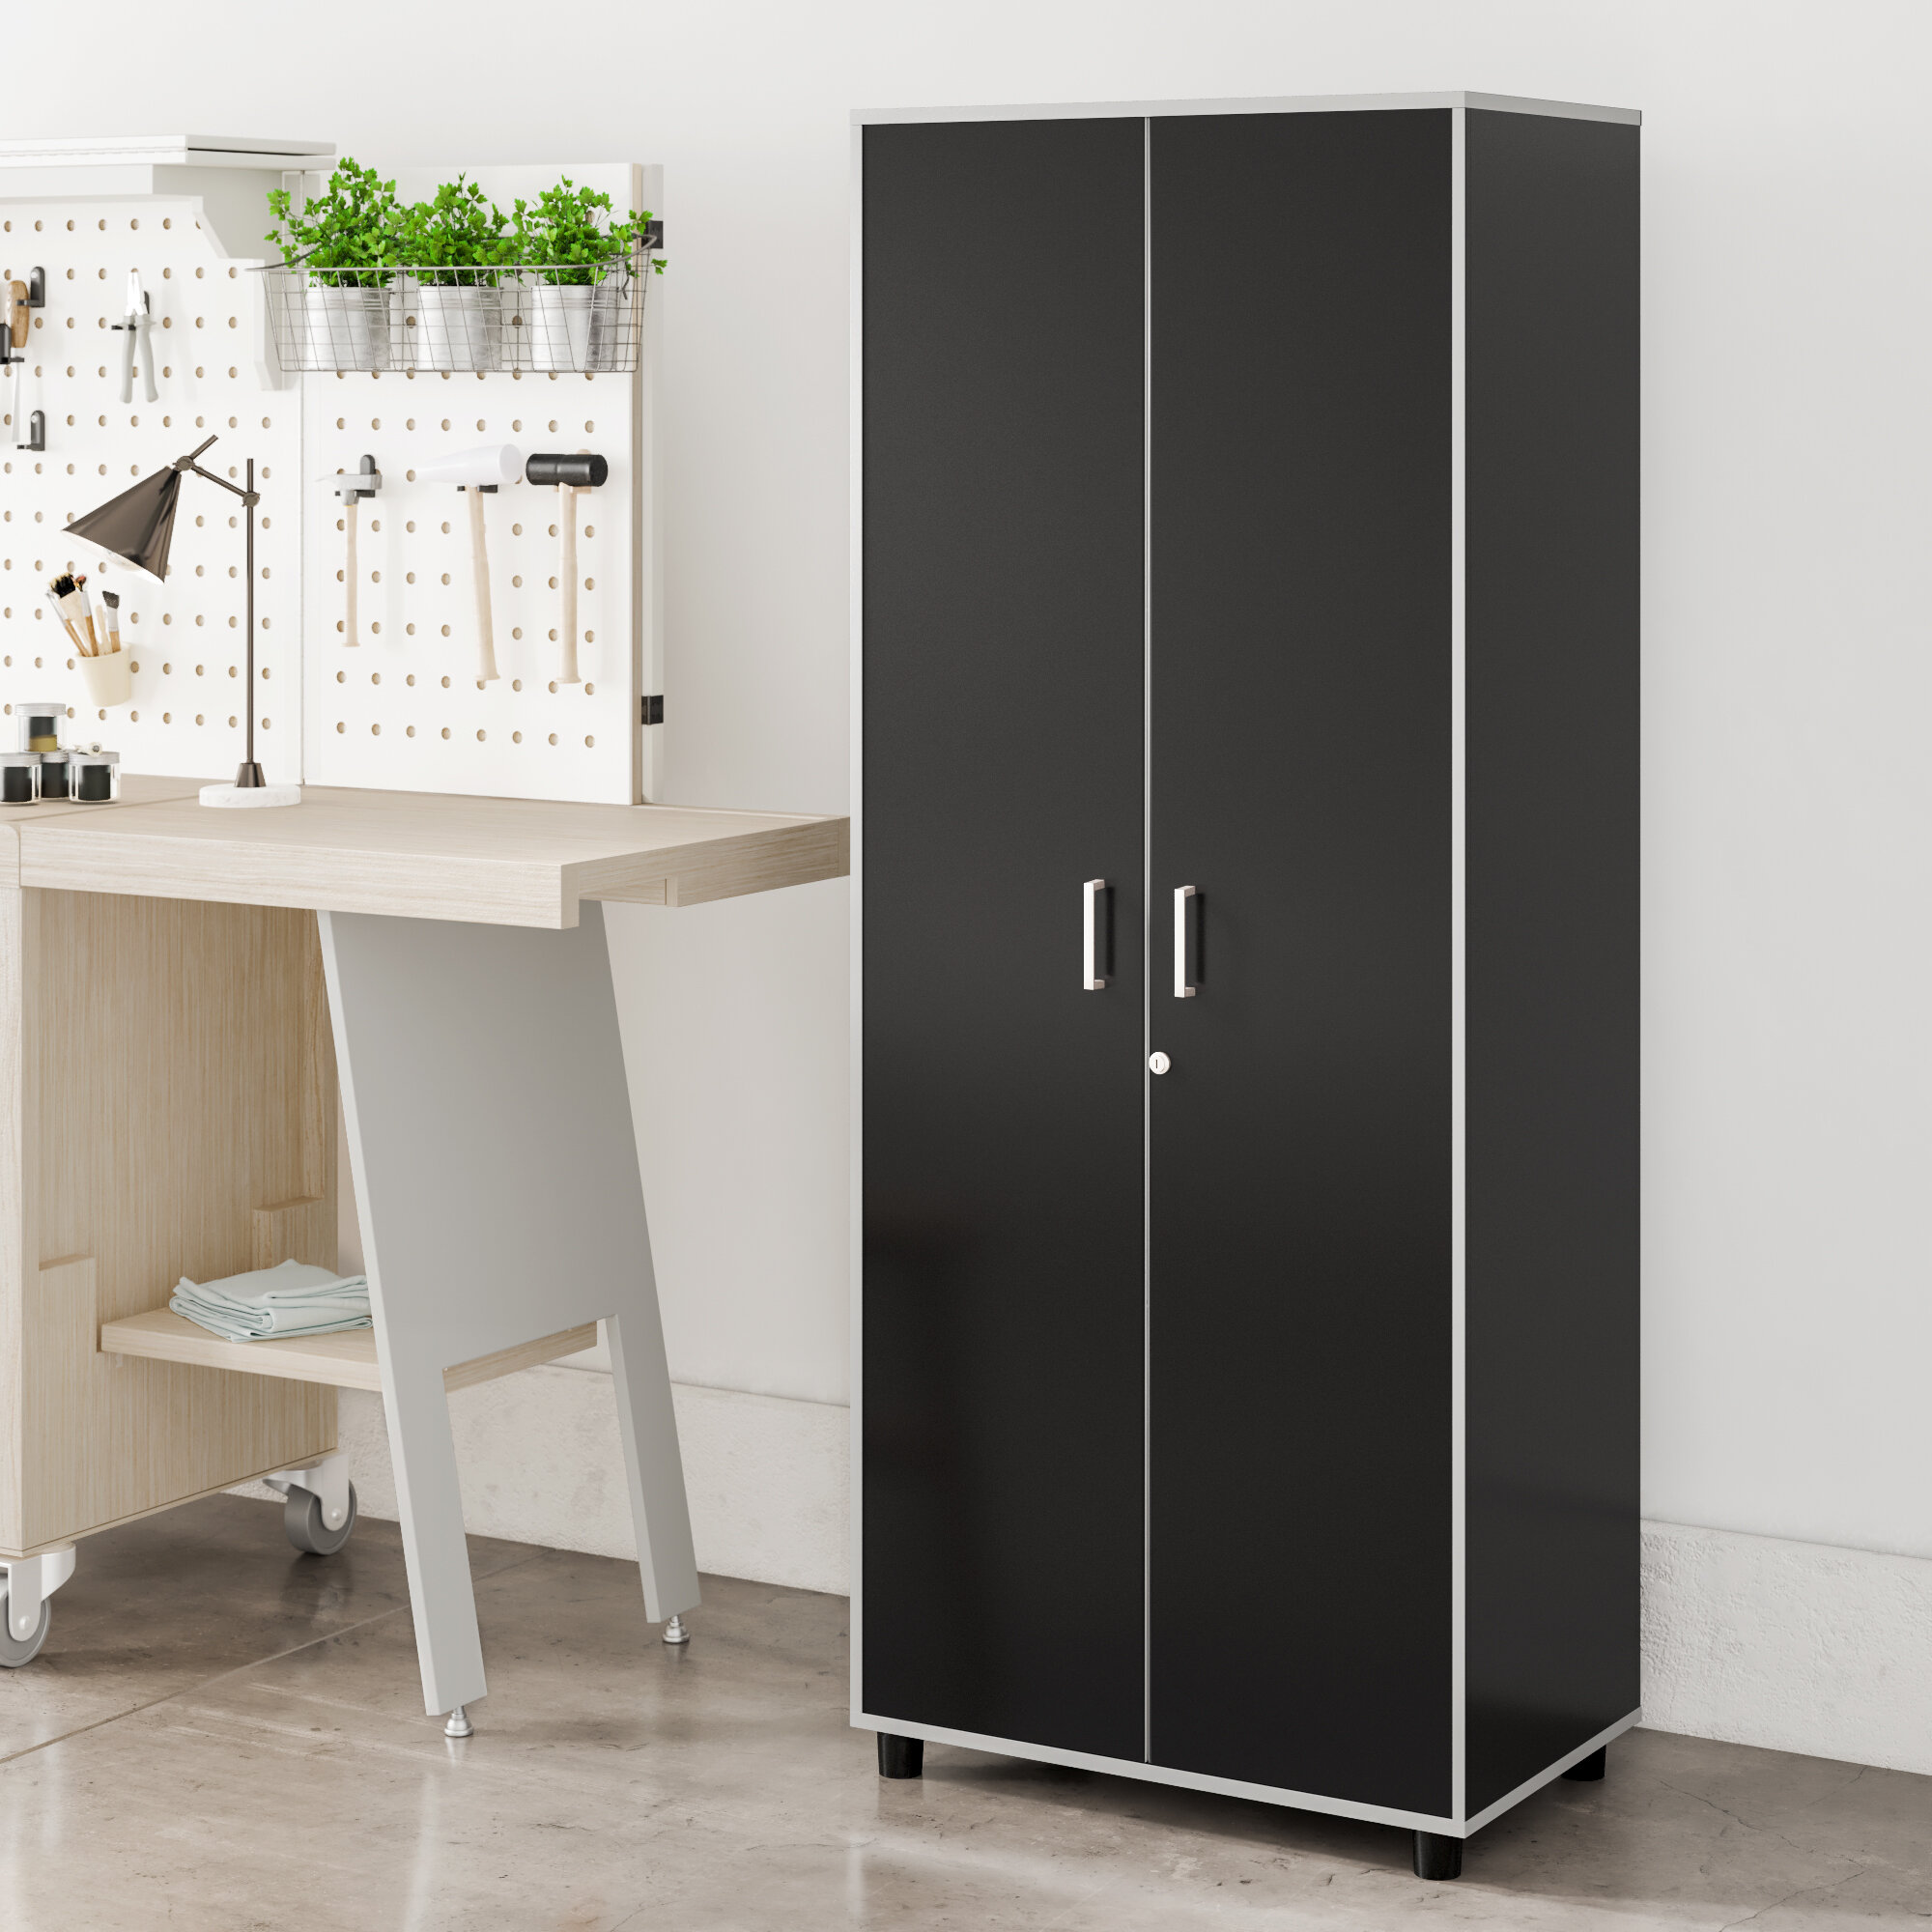 Dotted Line Burch 74 3 H X 29 7 W X 19 7 D Tall Storage Cabinet